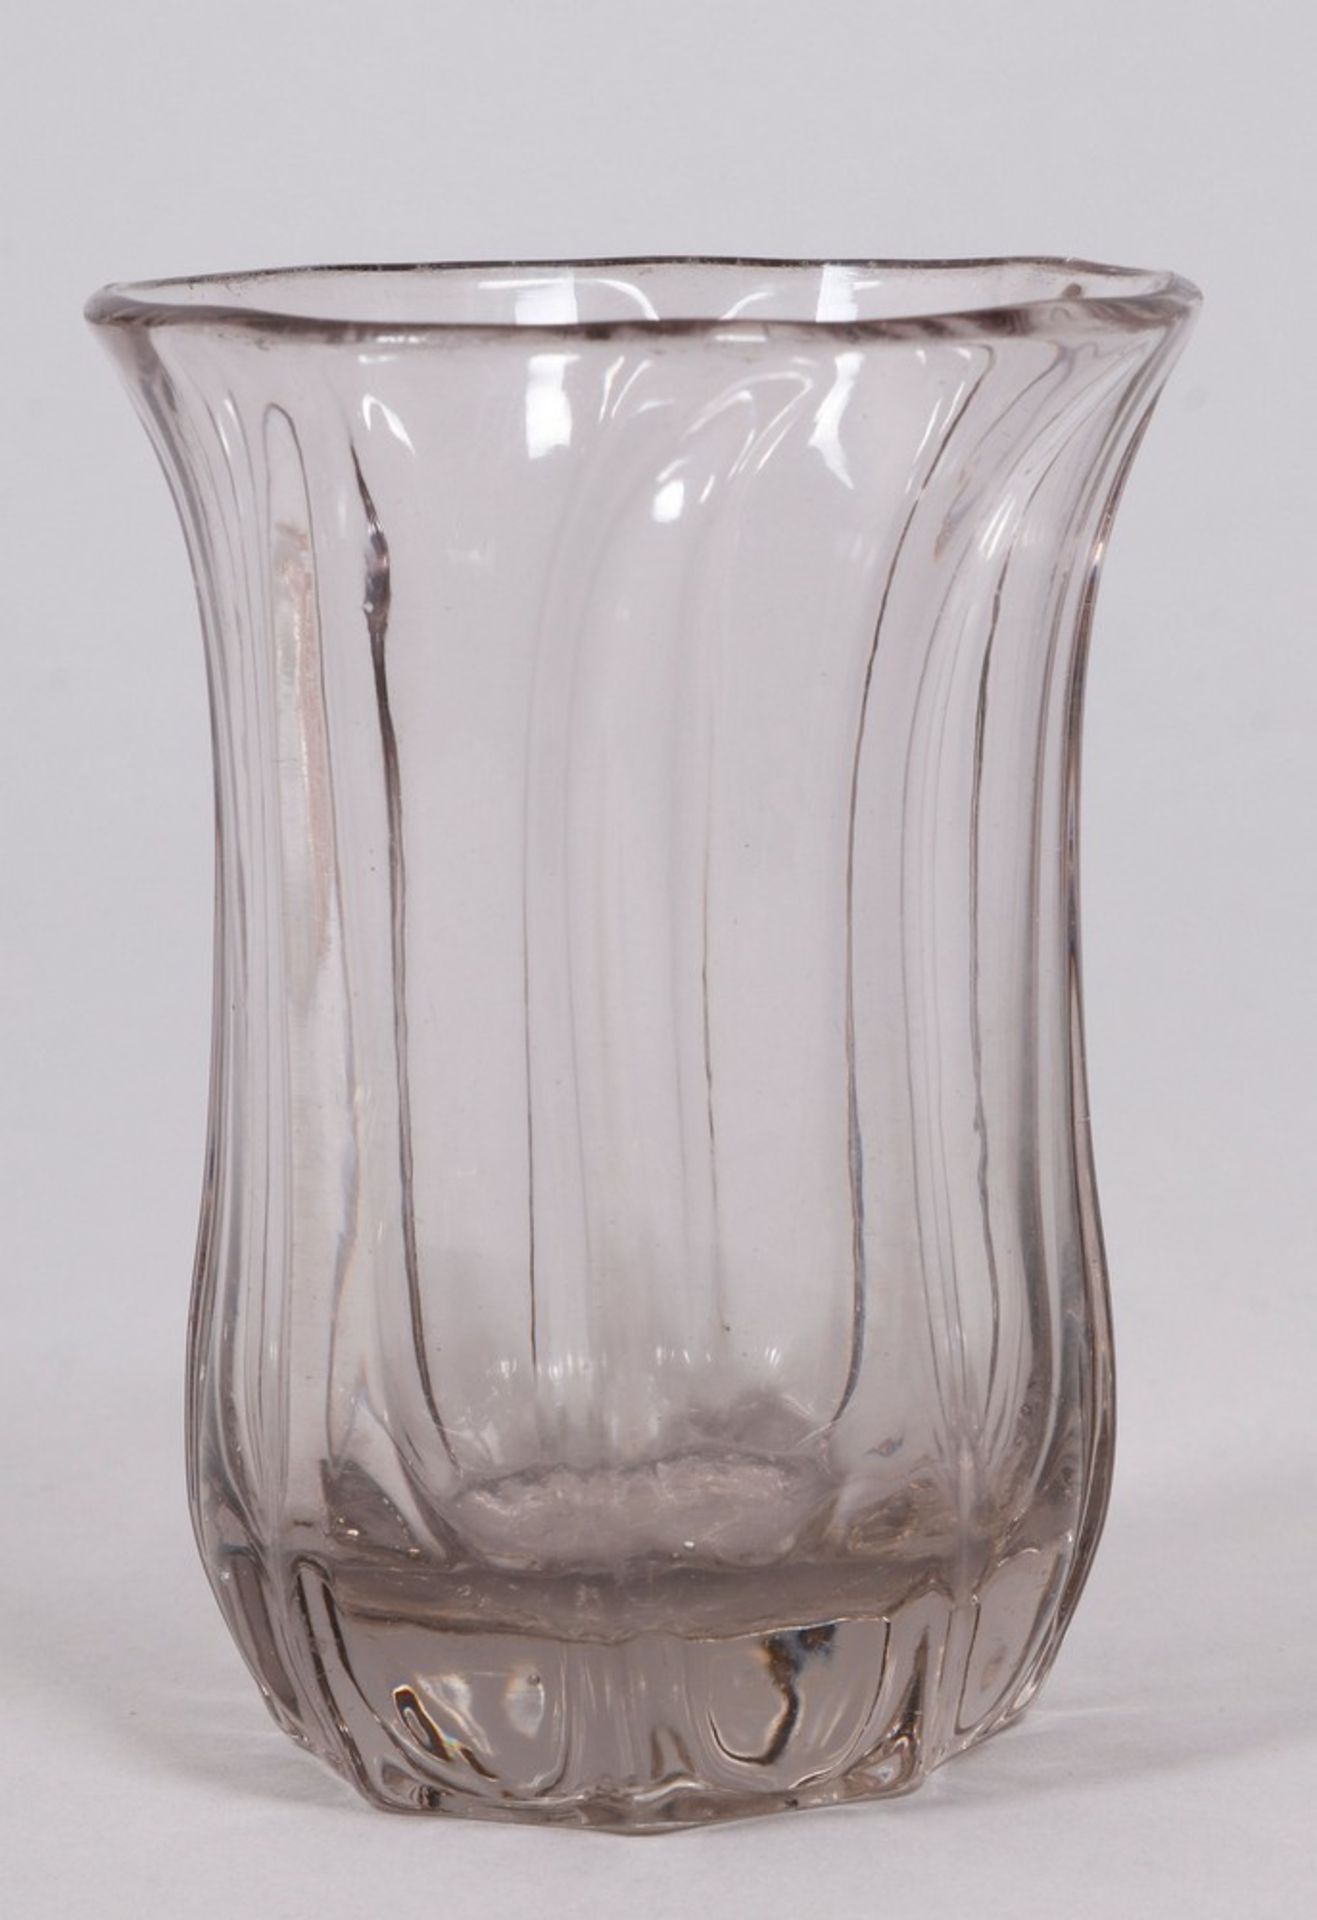 Mixed lot of Biedermeier glasses, 5 pieces, colorless, German, 19th C. - Image 5 of 6